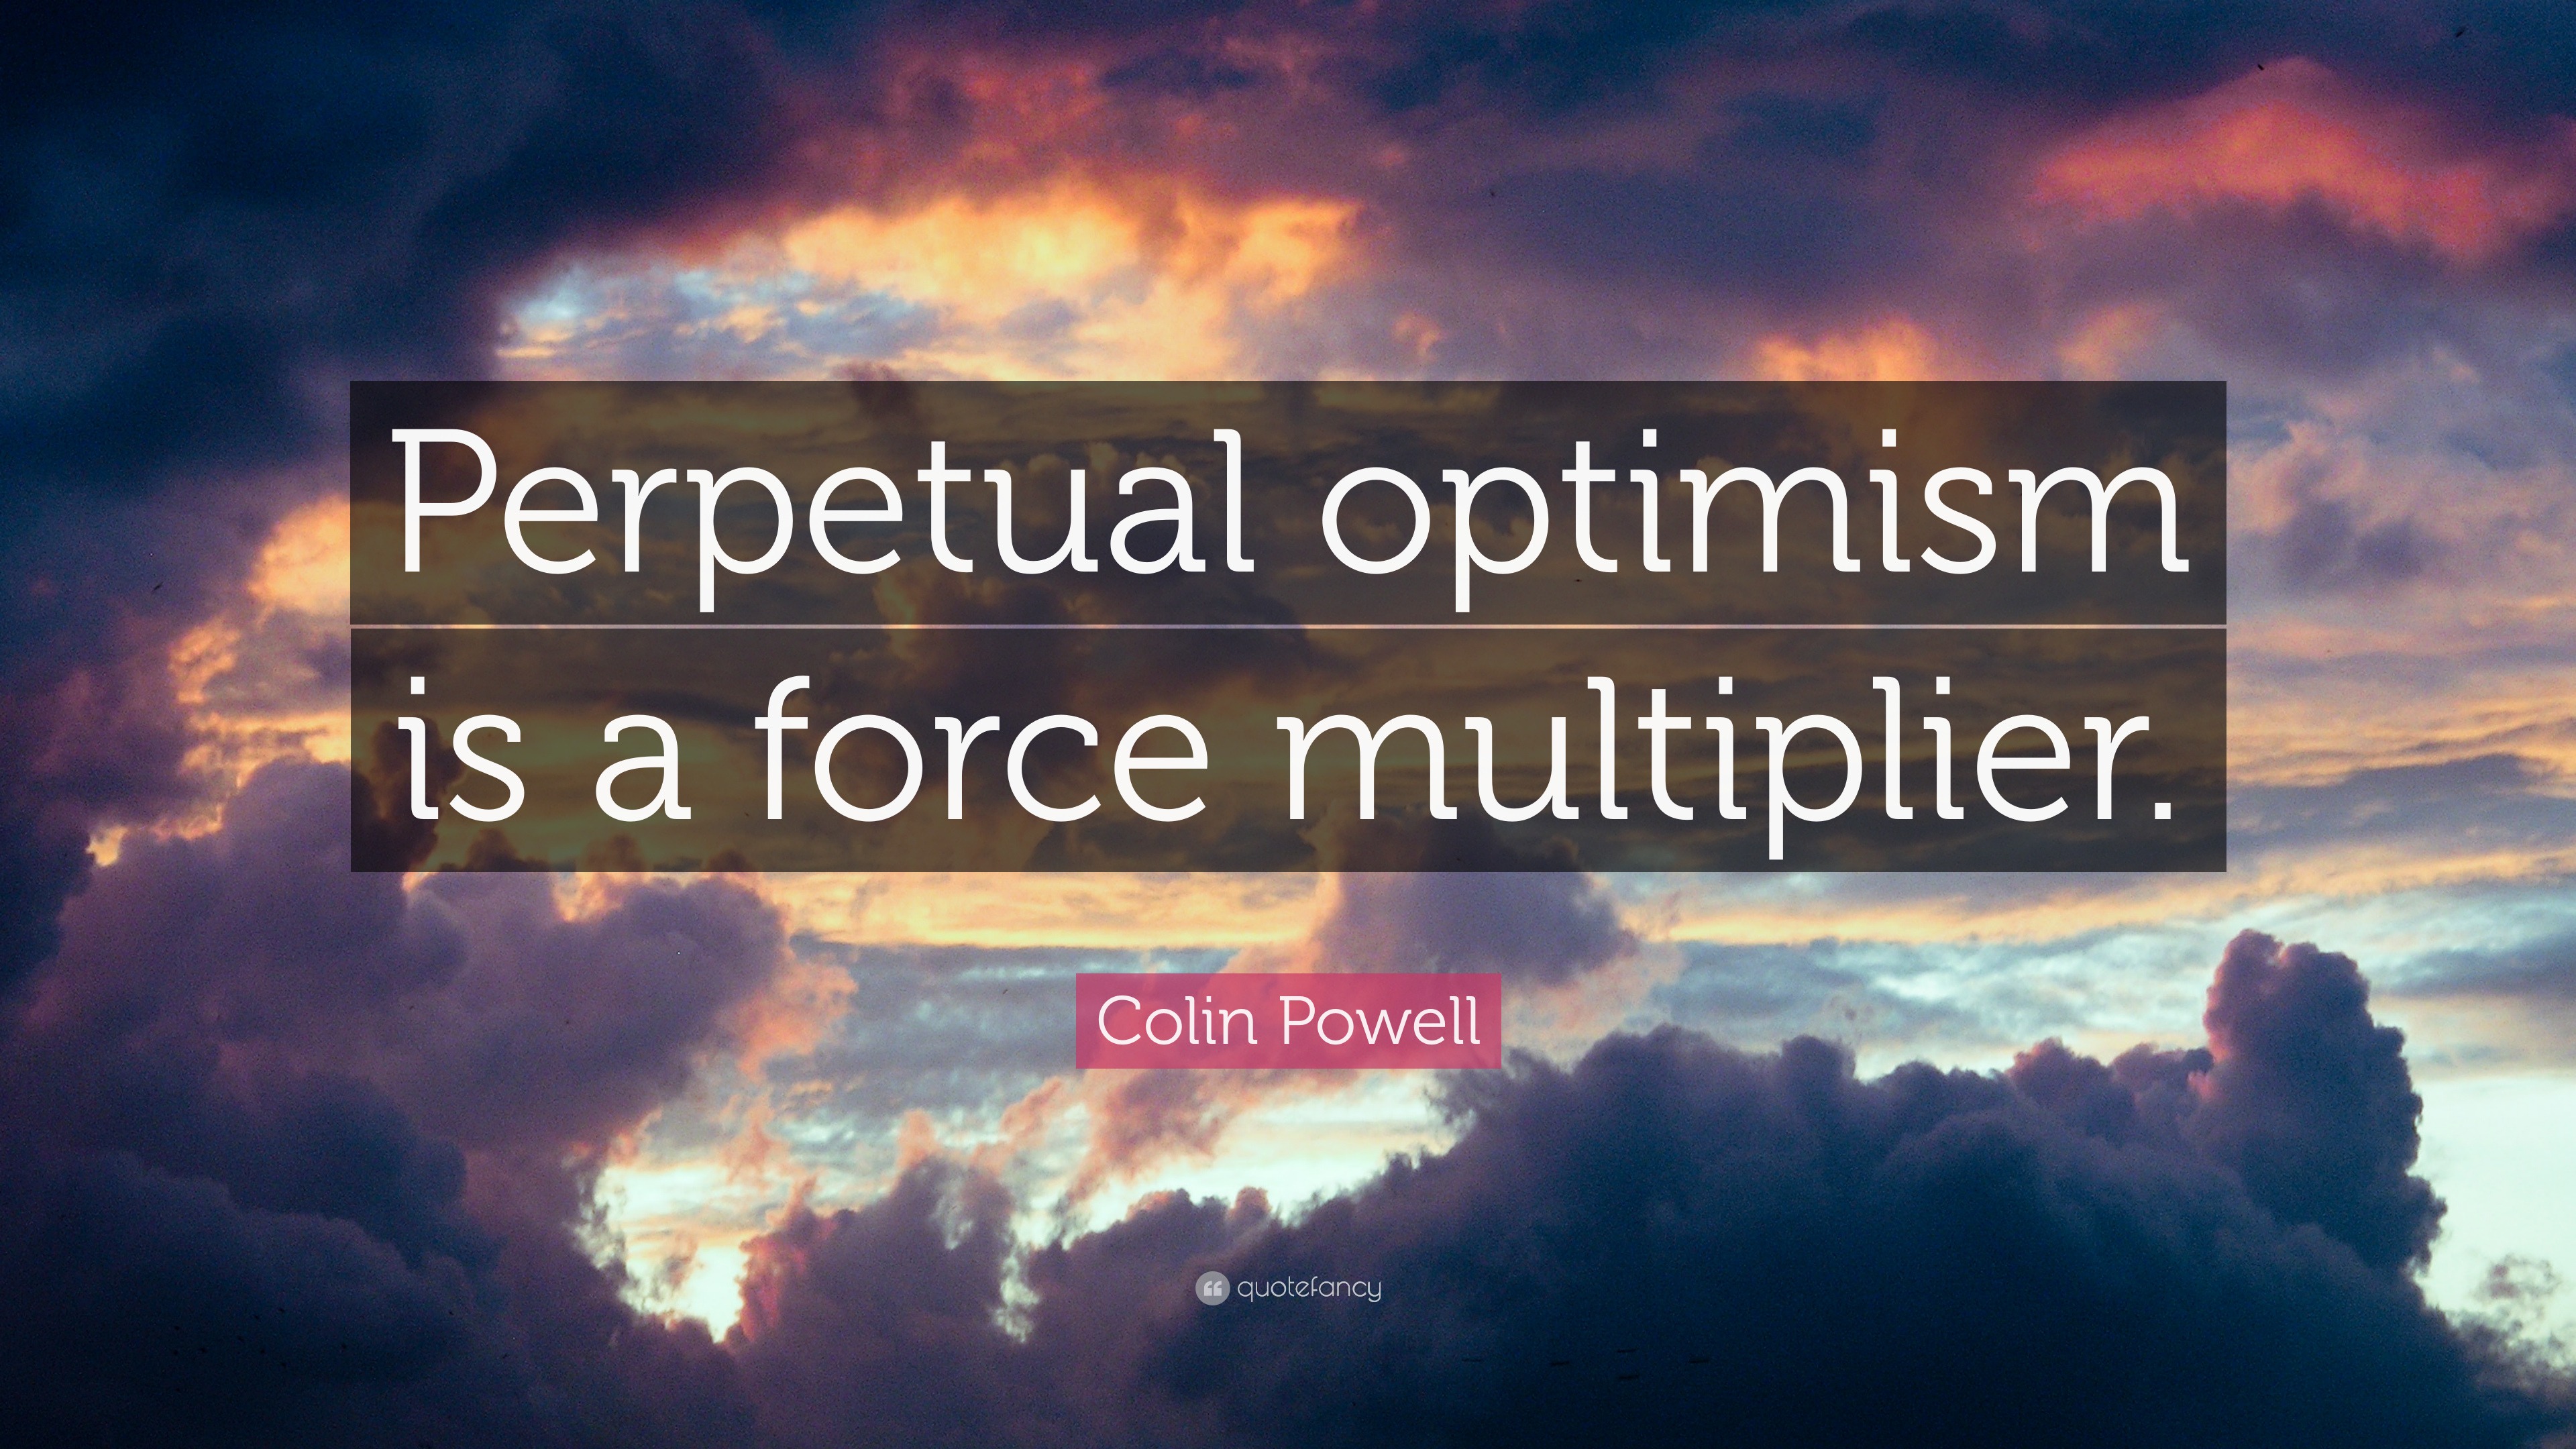 Colin Powell Quote: “Perpetual optimism is a force multiplier.”